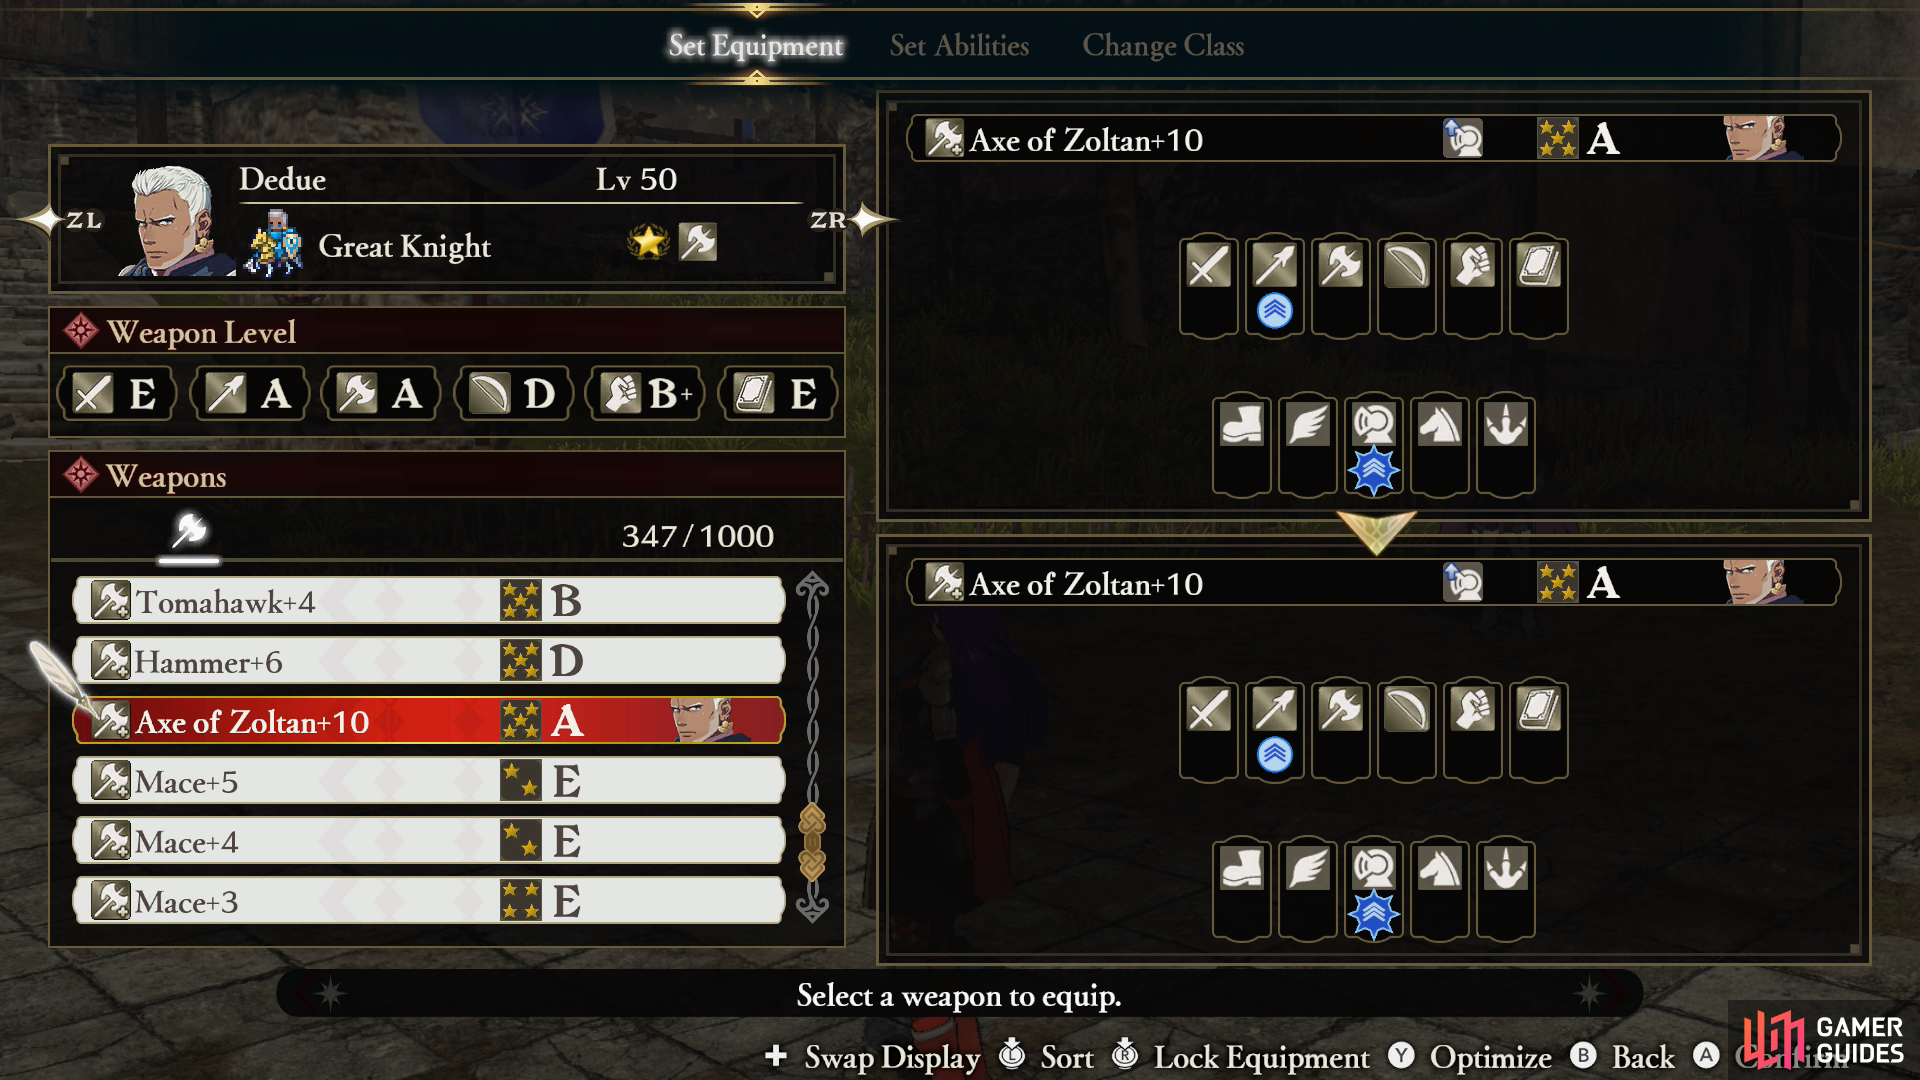 You can also see the advantages of individual weapons in the Set Equipment menu,